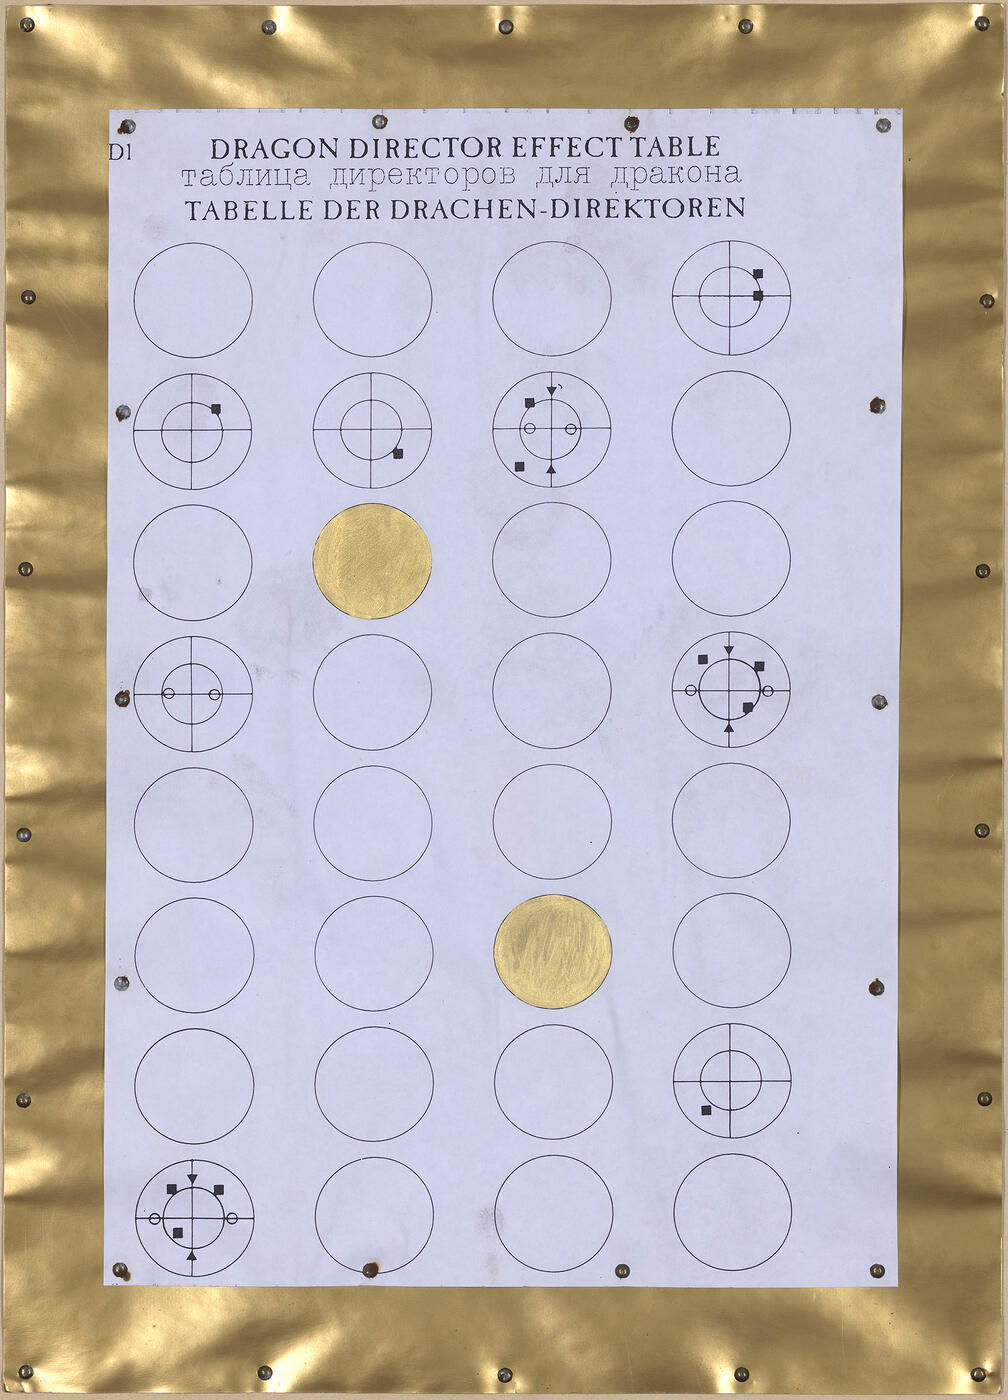 Dragon Director Effect Table, from "Circles Coloured by N. Panitkov. Two Sheets.” Series